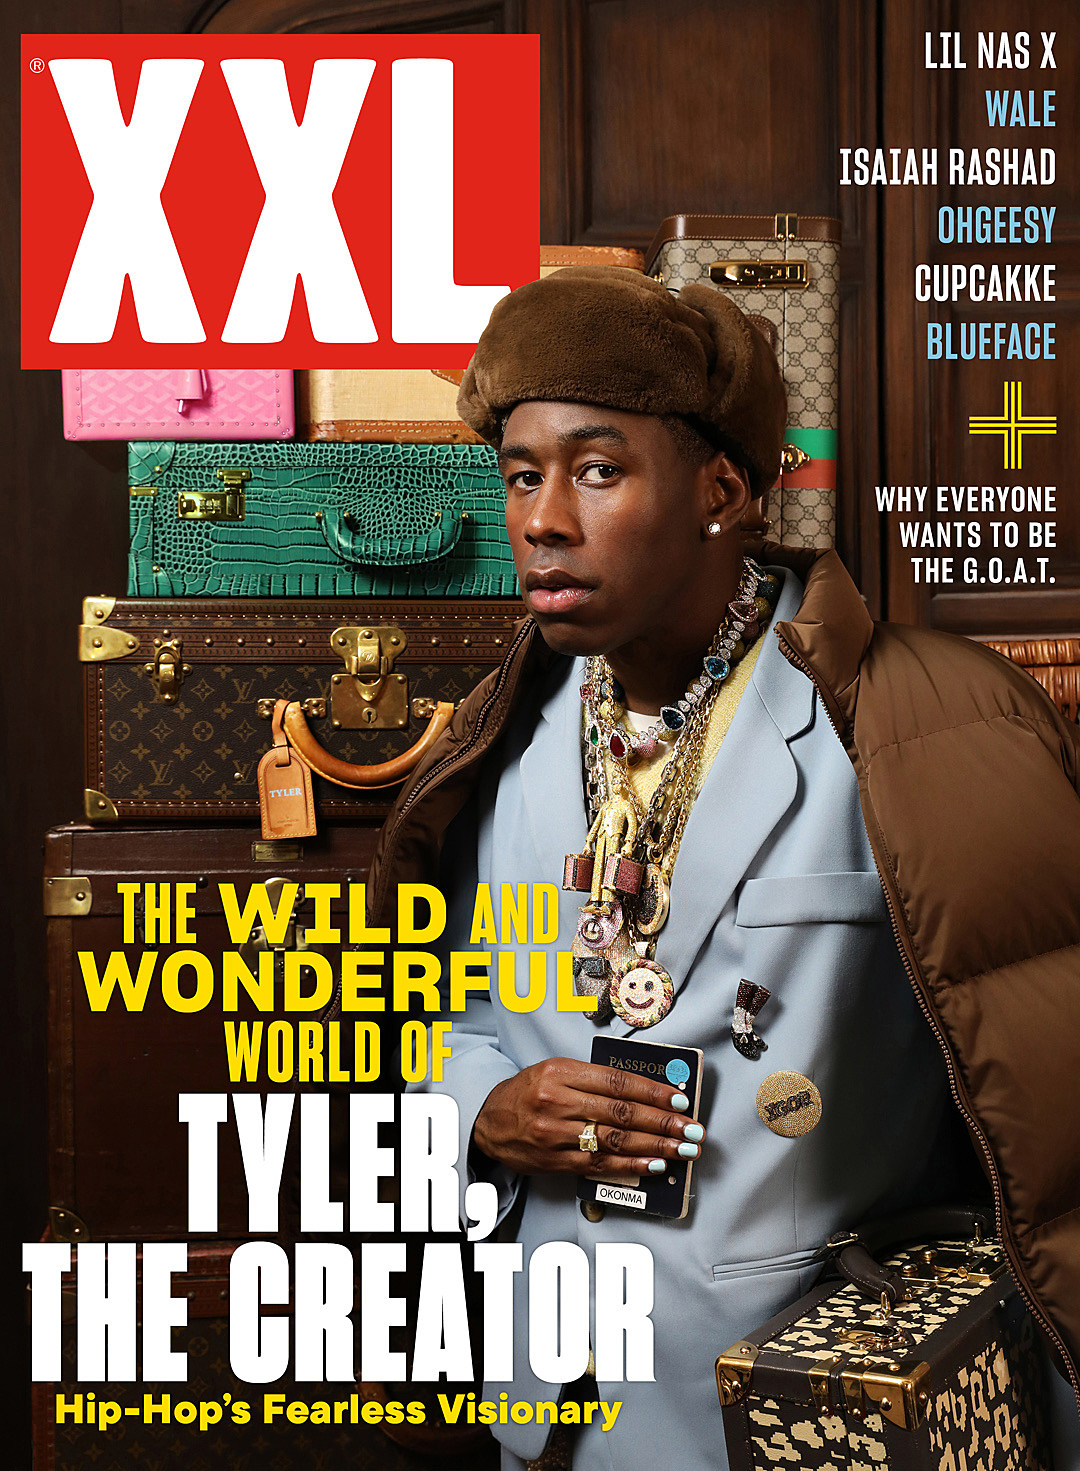 yonkers tyler the creator massive native instruments